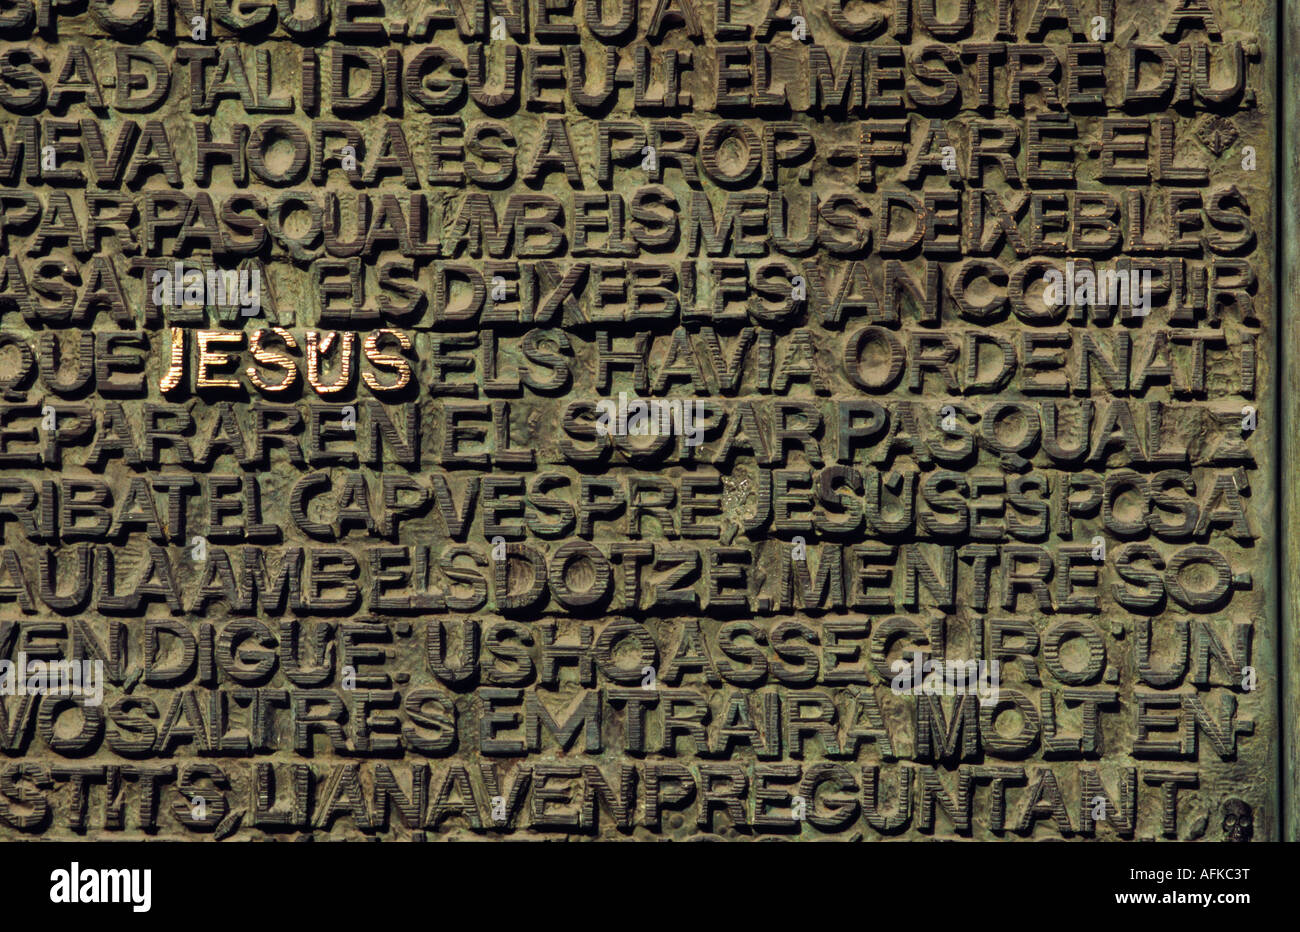 The name of Jesus stands out amidst a jumble of words etched into the door of the Passion Facade at Gaudi's La Sagrada Familia Stock Photo